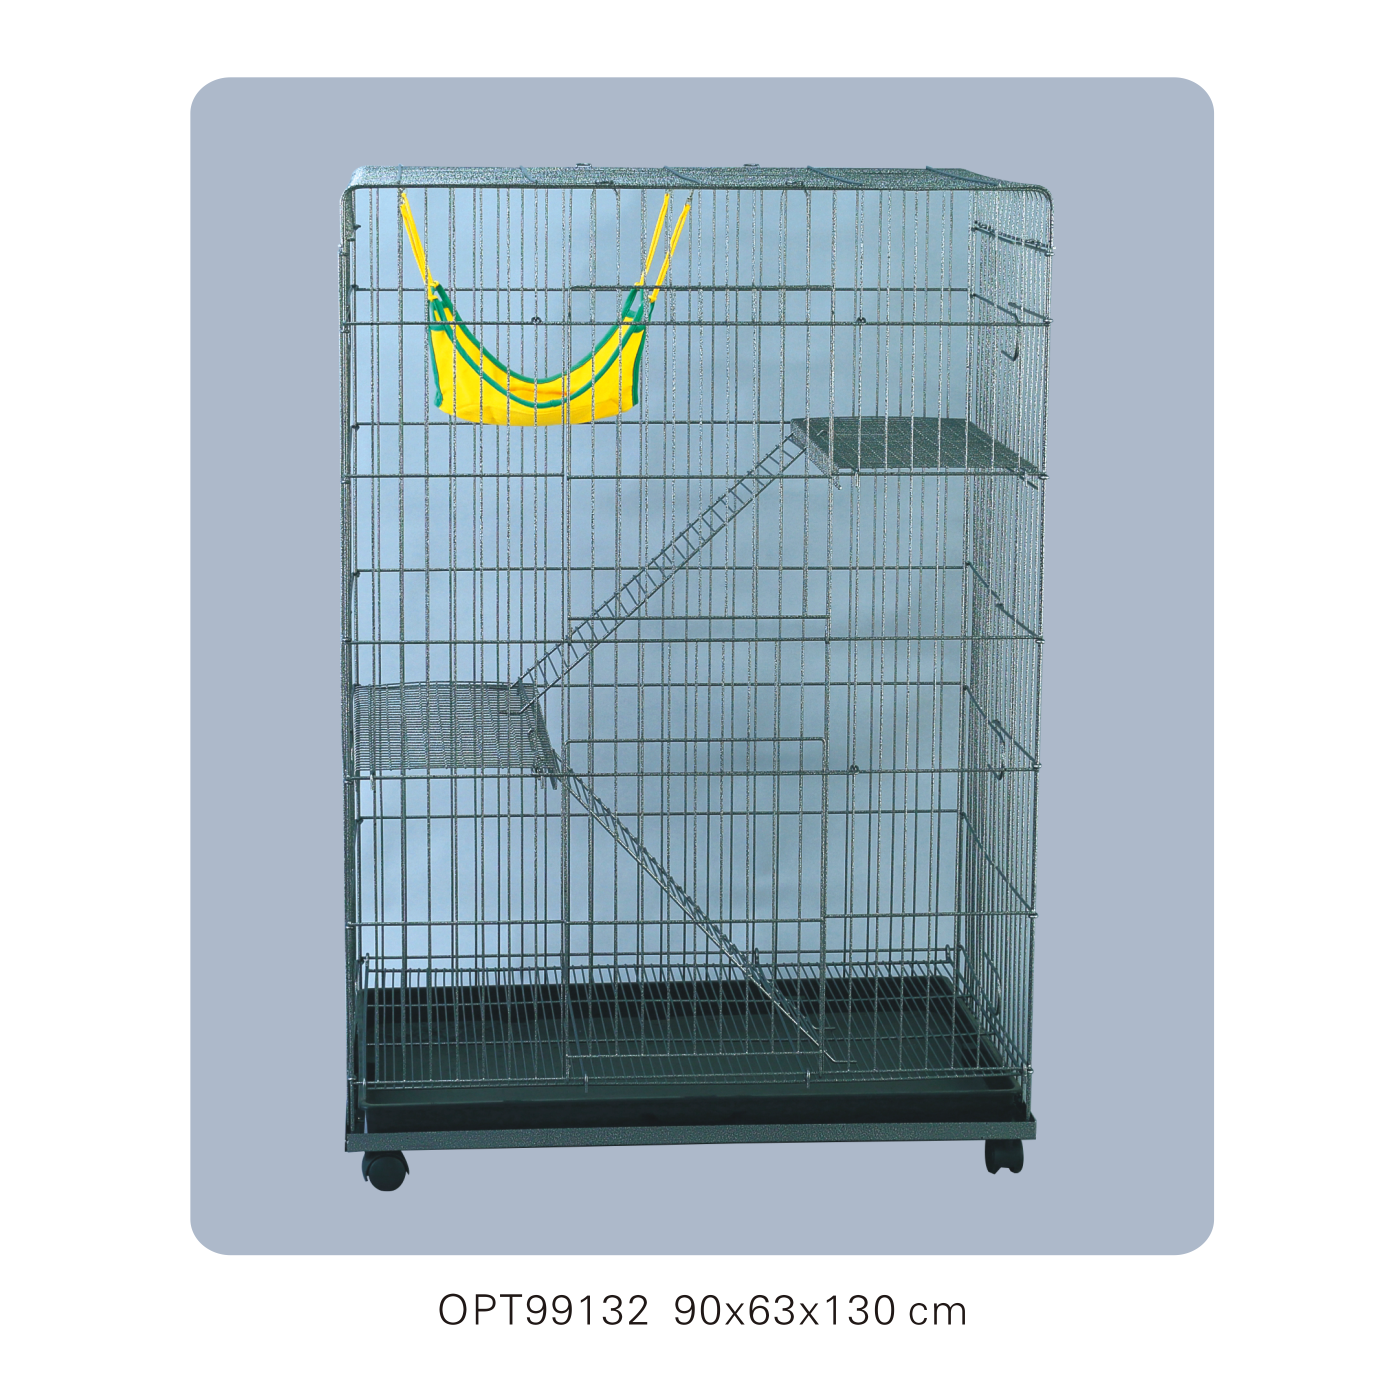 OPT99132 90x63x130cm small animal cages